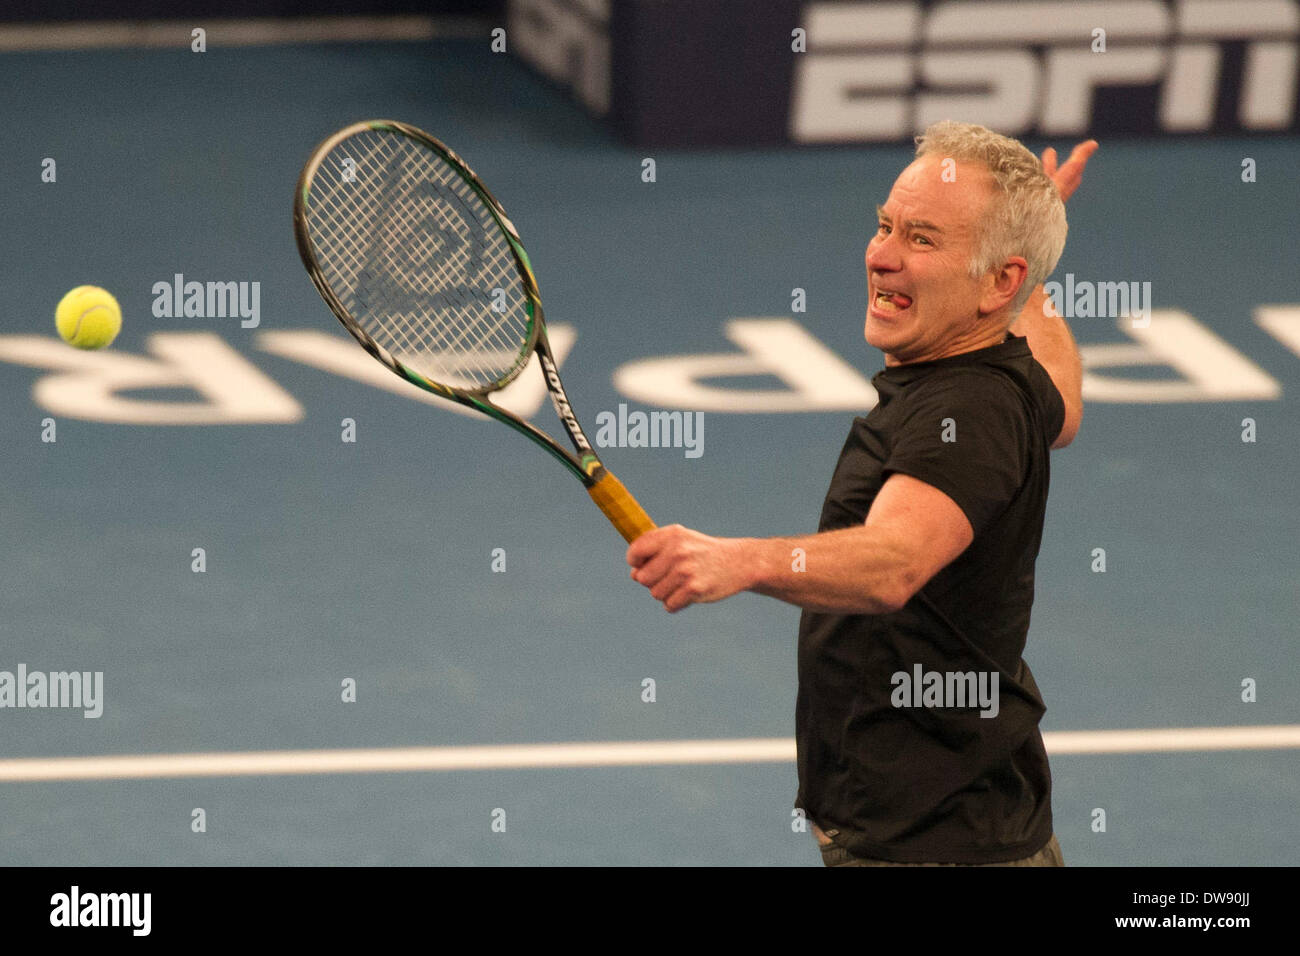 Manhattan, New York, USA. 3rd Mar, 2014. March 03, 2014: John McEnroe bites on his tongue as he reaches for a volley during the BNP Paribas Showdown on World Tennis Day at Madison Square Garden in Manhattan, New York. Credit:  csm/Alamy Live News Stock Photo